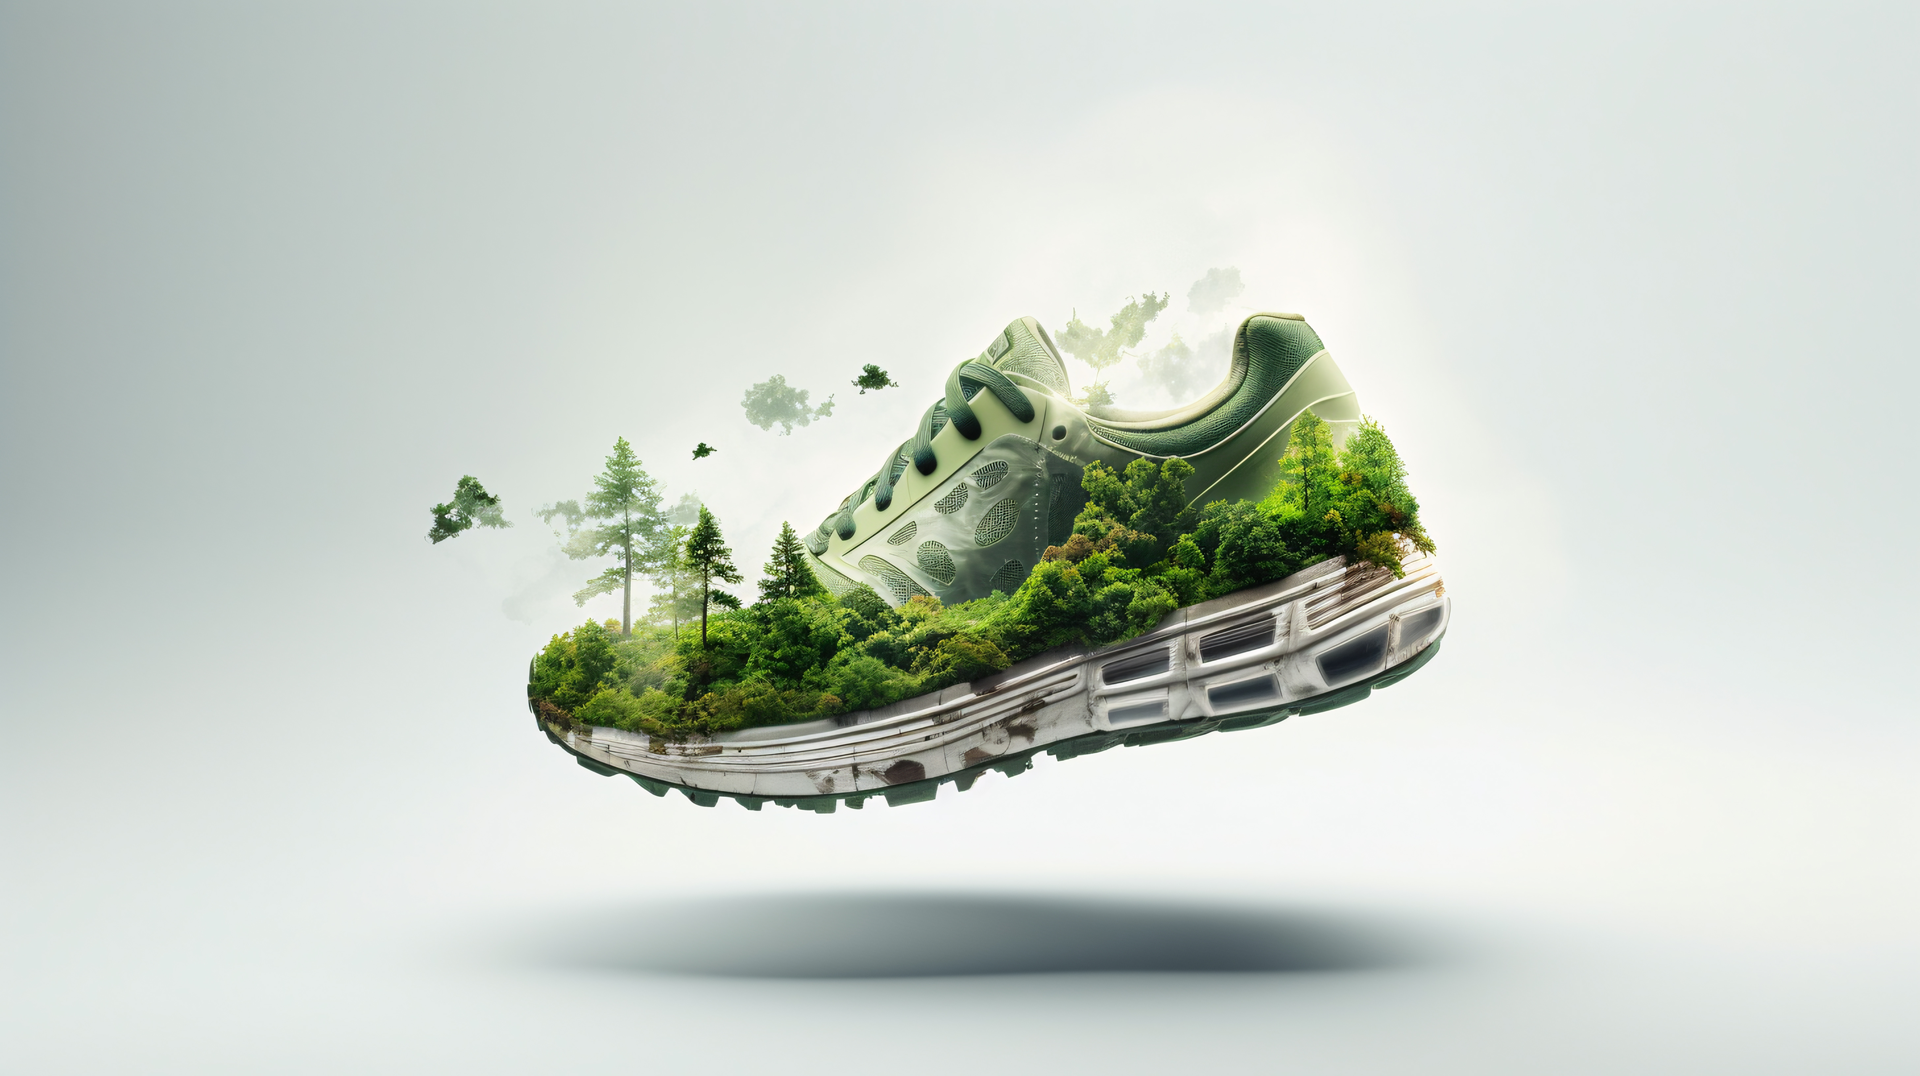 Product Carbon Footprint